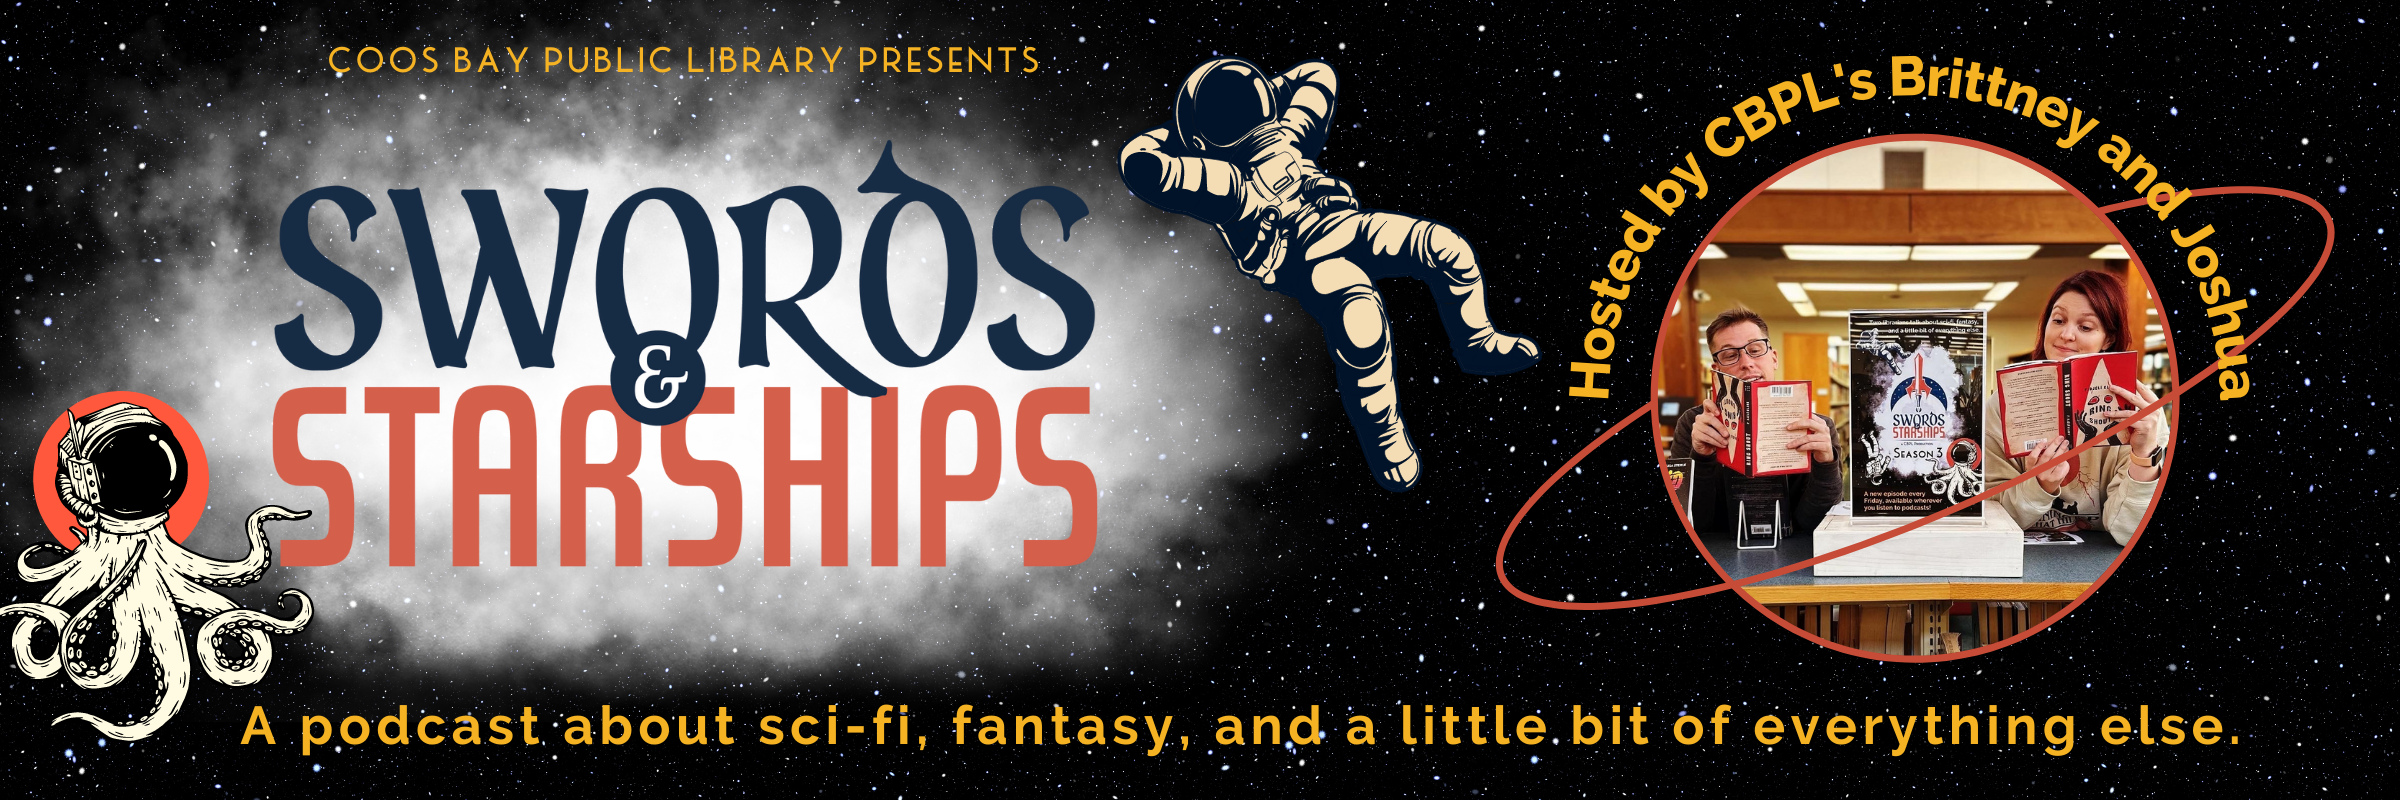 Coos Bay Public Library presents Swords and Starships. A podcast about sci-fi, fantasy, and a little bit of everything else. Hosted by CBPL's Brittney and Joshua.